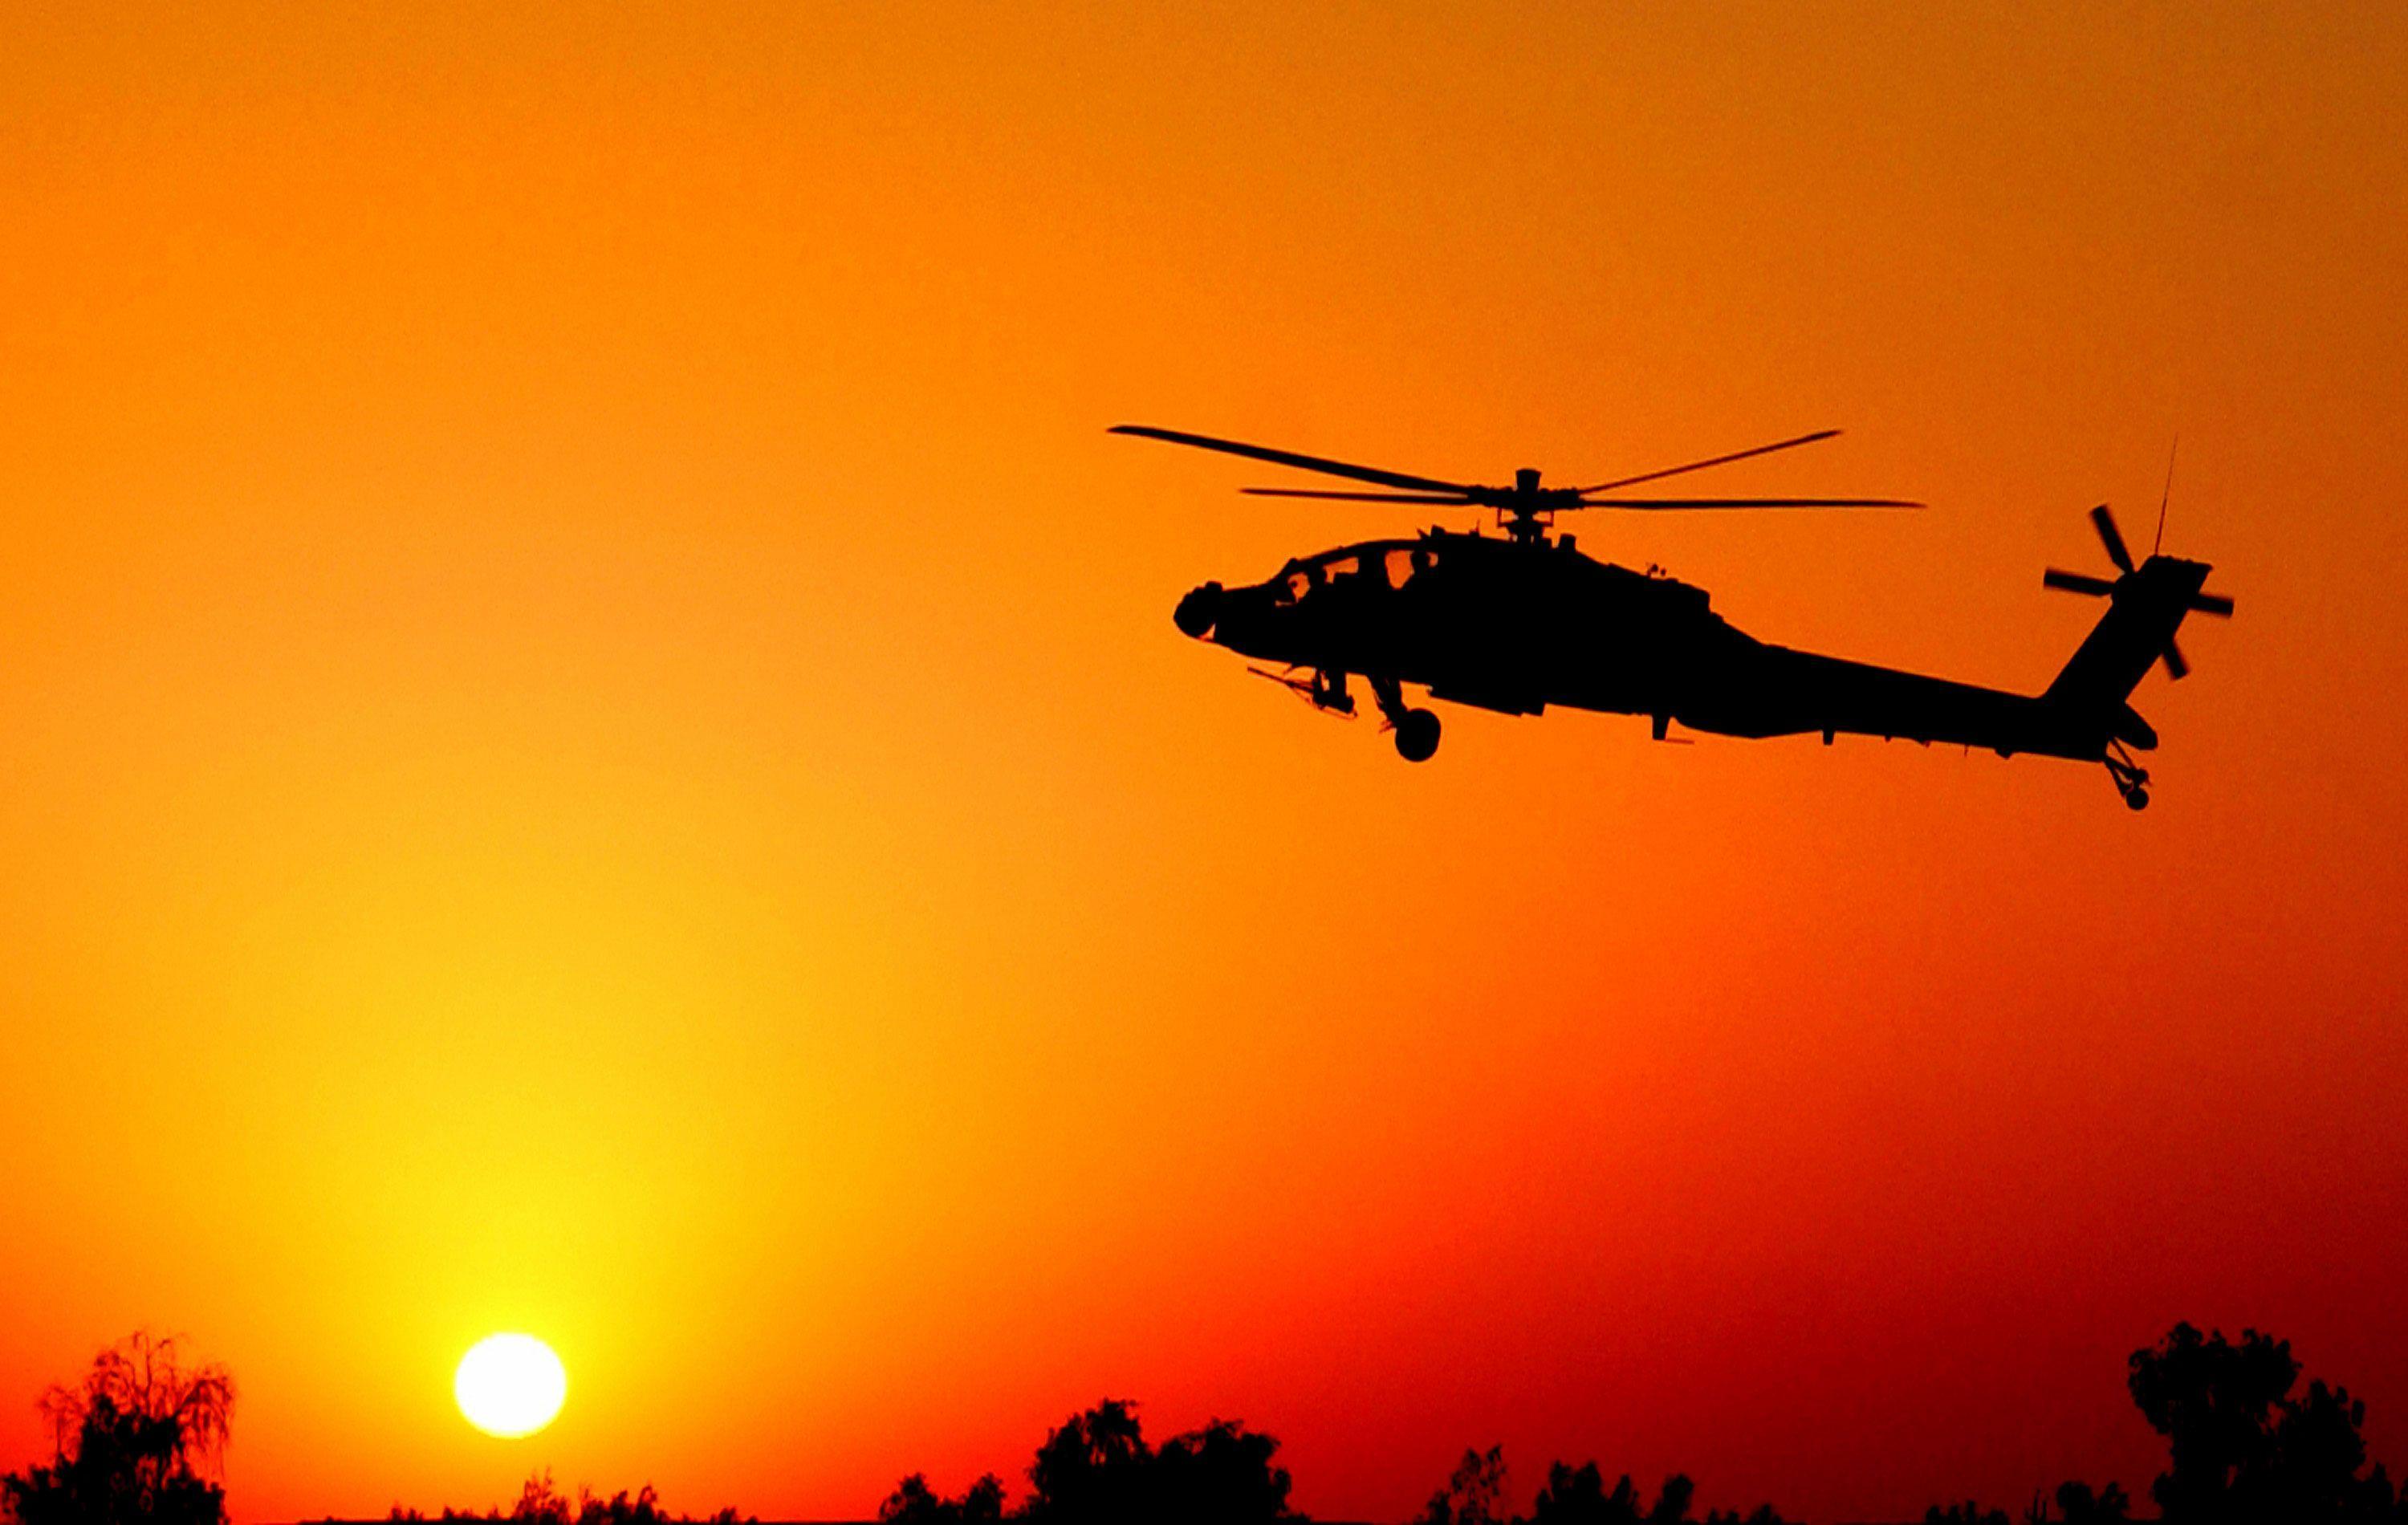 AmazingPict.com. Military Helicopters Wallpaper Collection